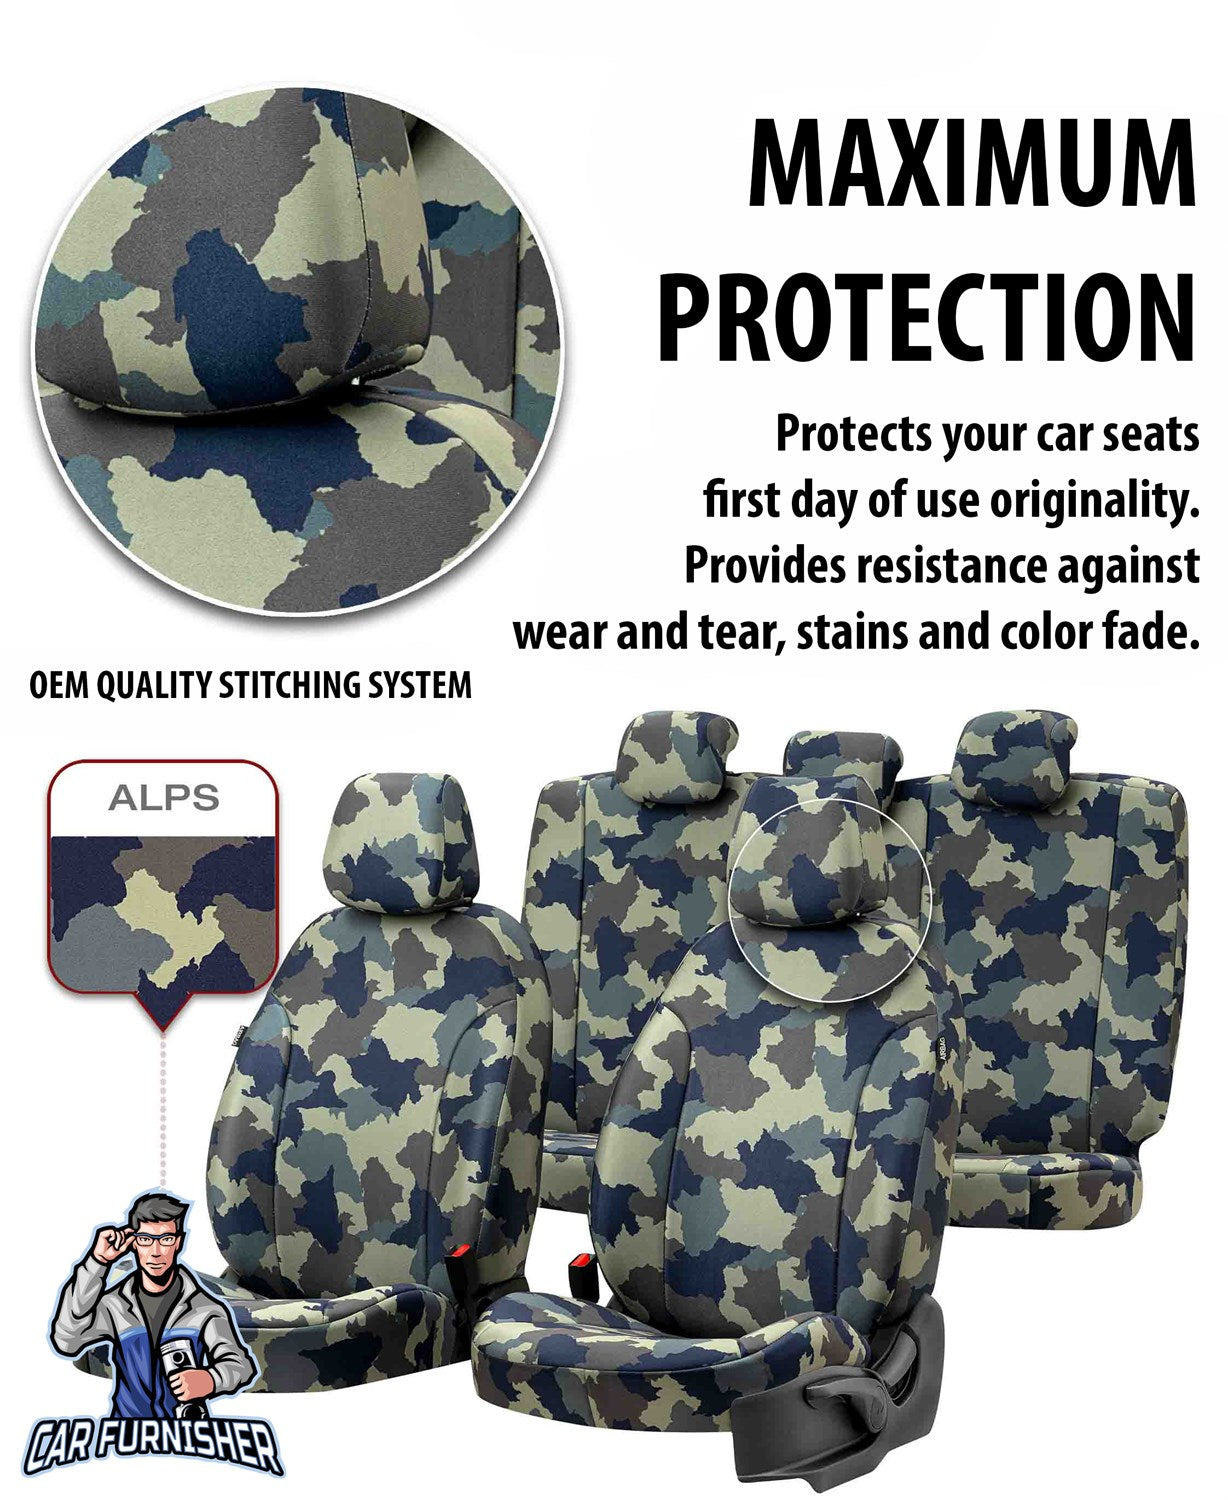 Ford Tourneo Courier Seat Covers Camouflage Waterproof Design Mojave Camo Waterproof Fabric